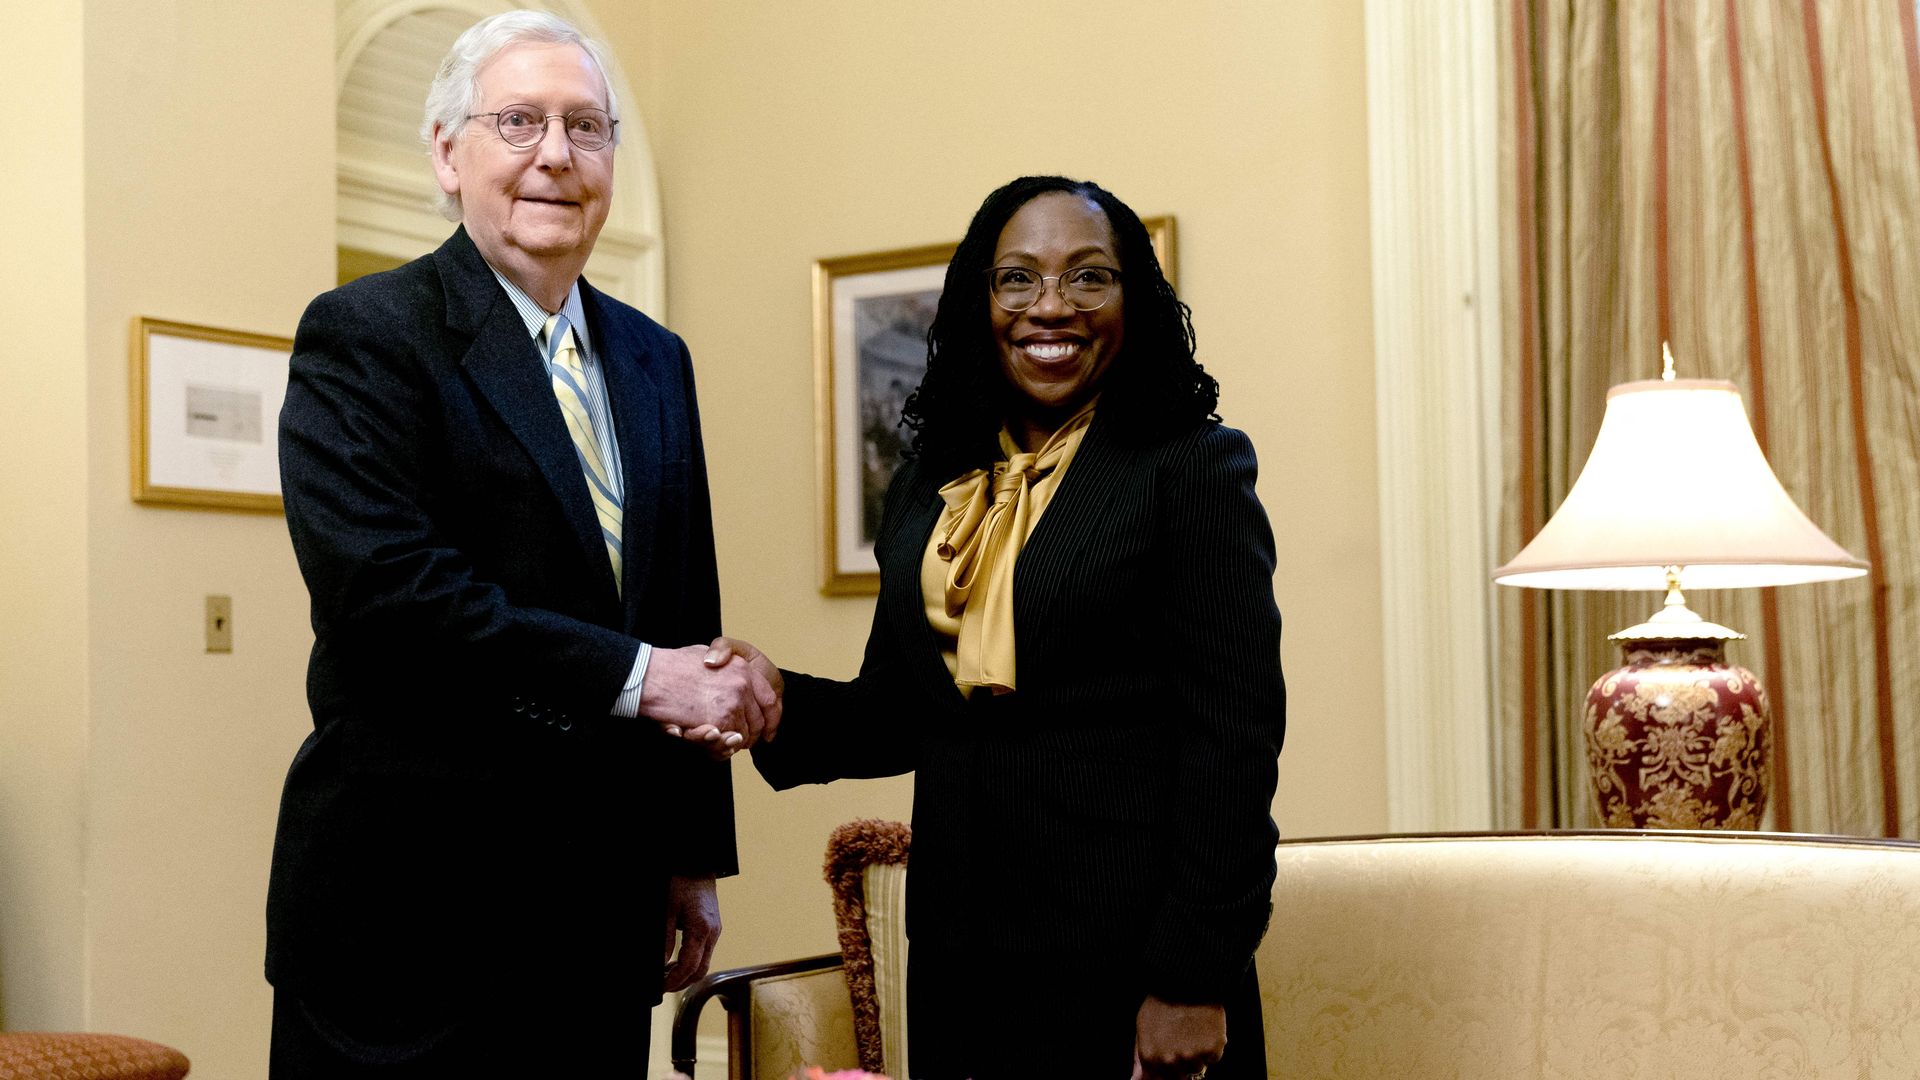 Senate Minority Leader Mitch McConnell is seen shaking hands with Judge Ketanji Brown Jackson during a visit to his office.